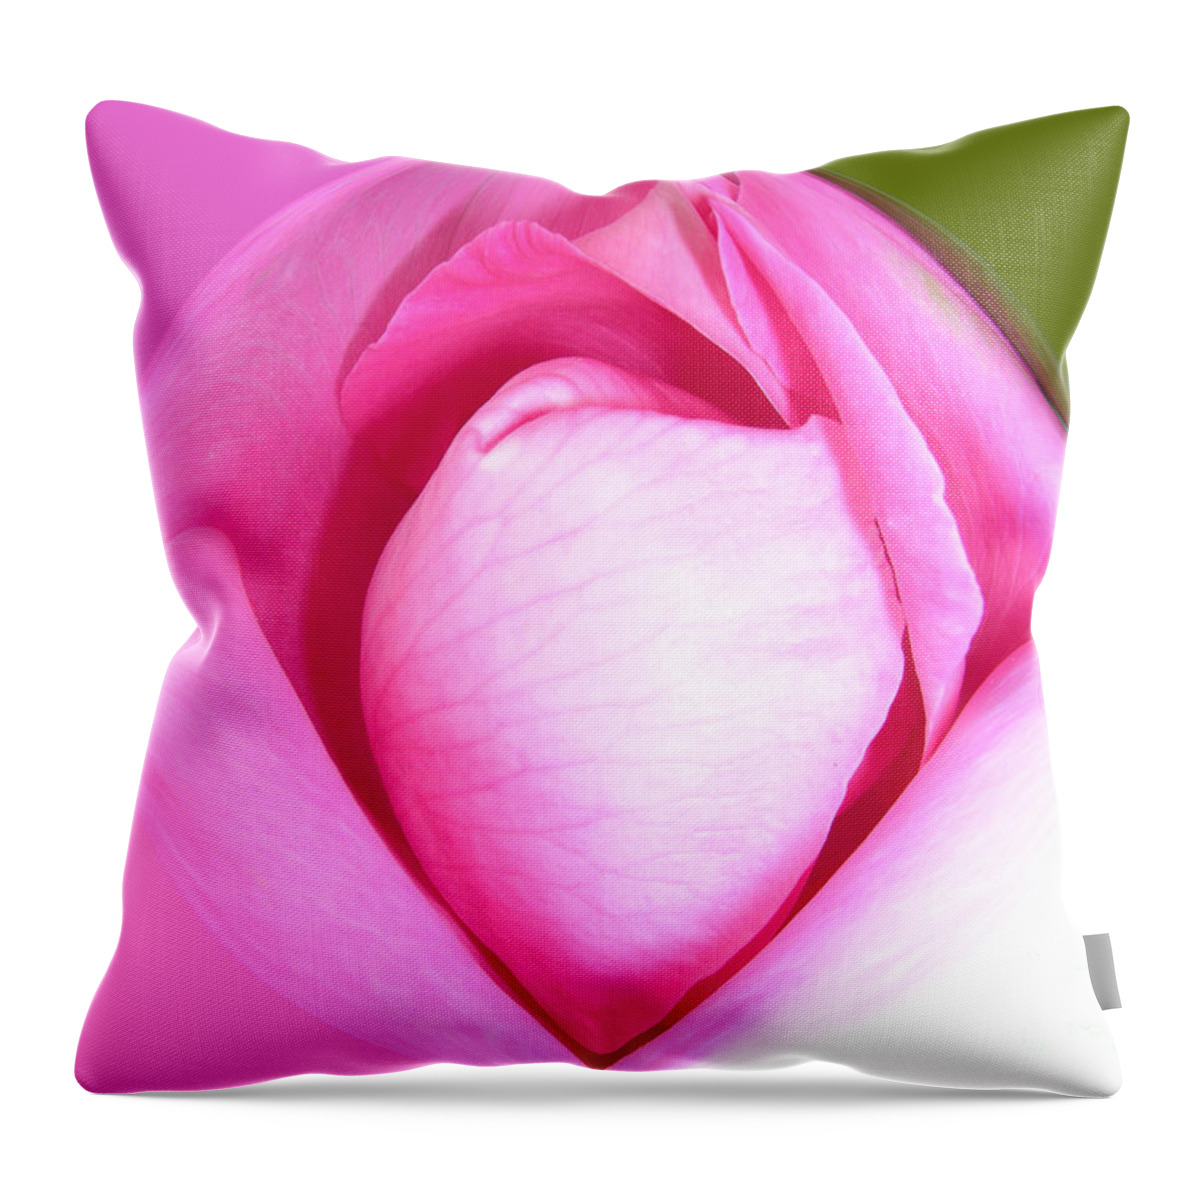 Floral Throw Pillow featuring the photograph Rose1 by Mark Gilman